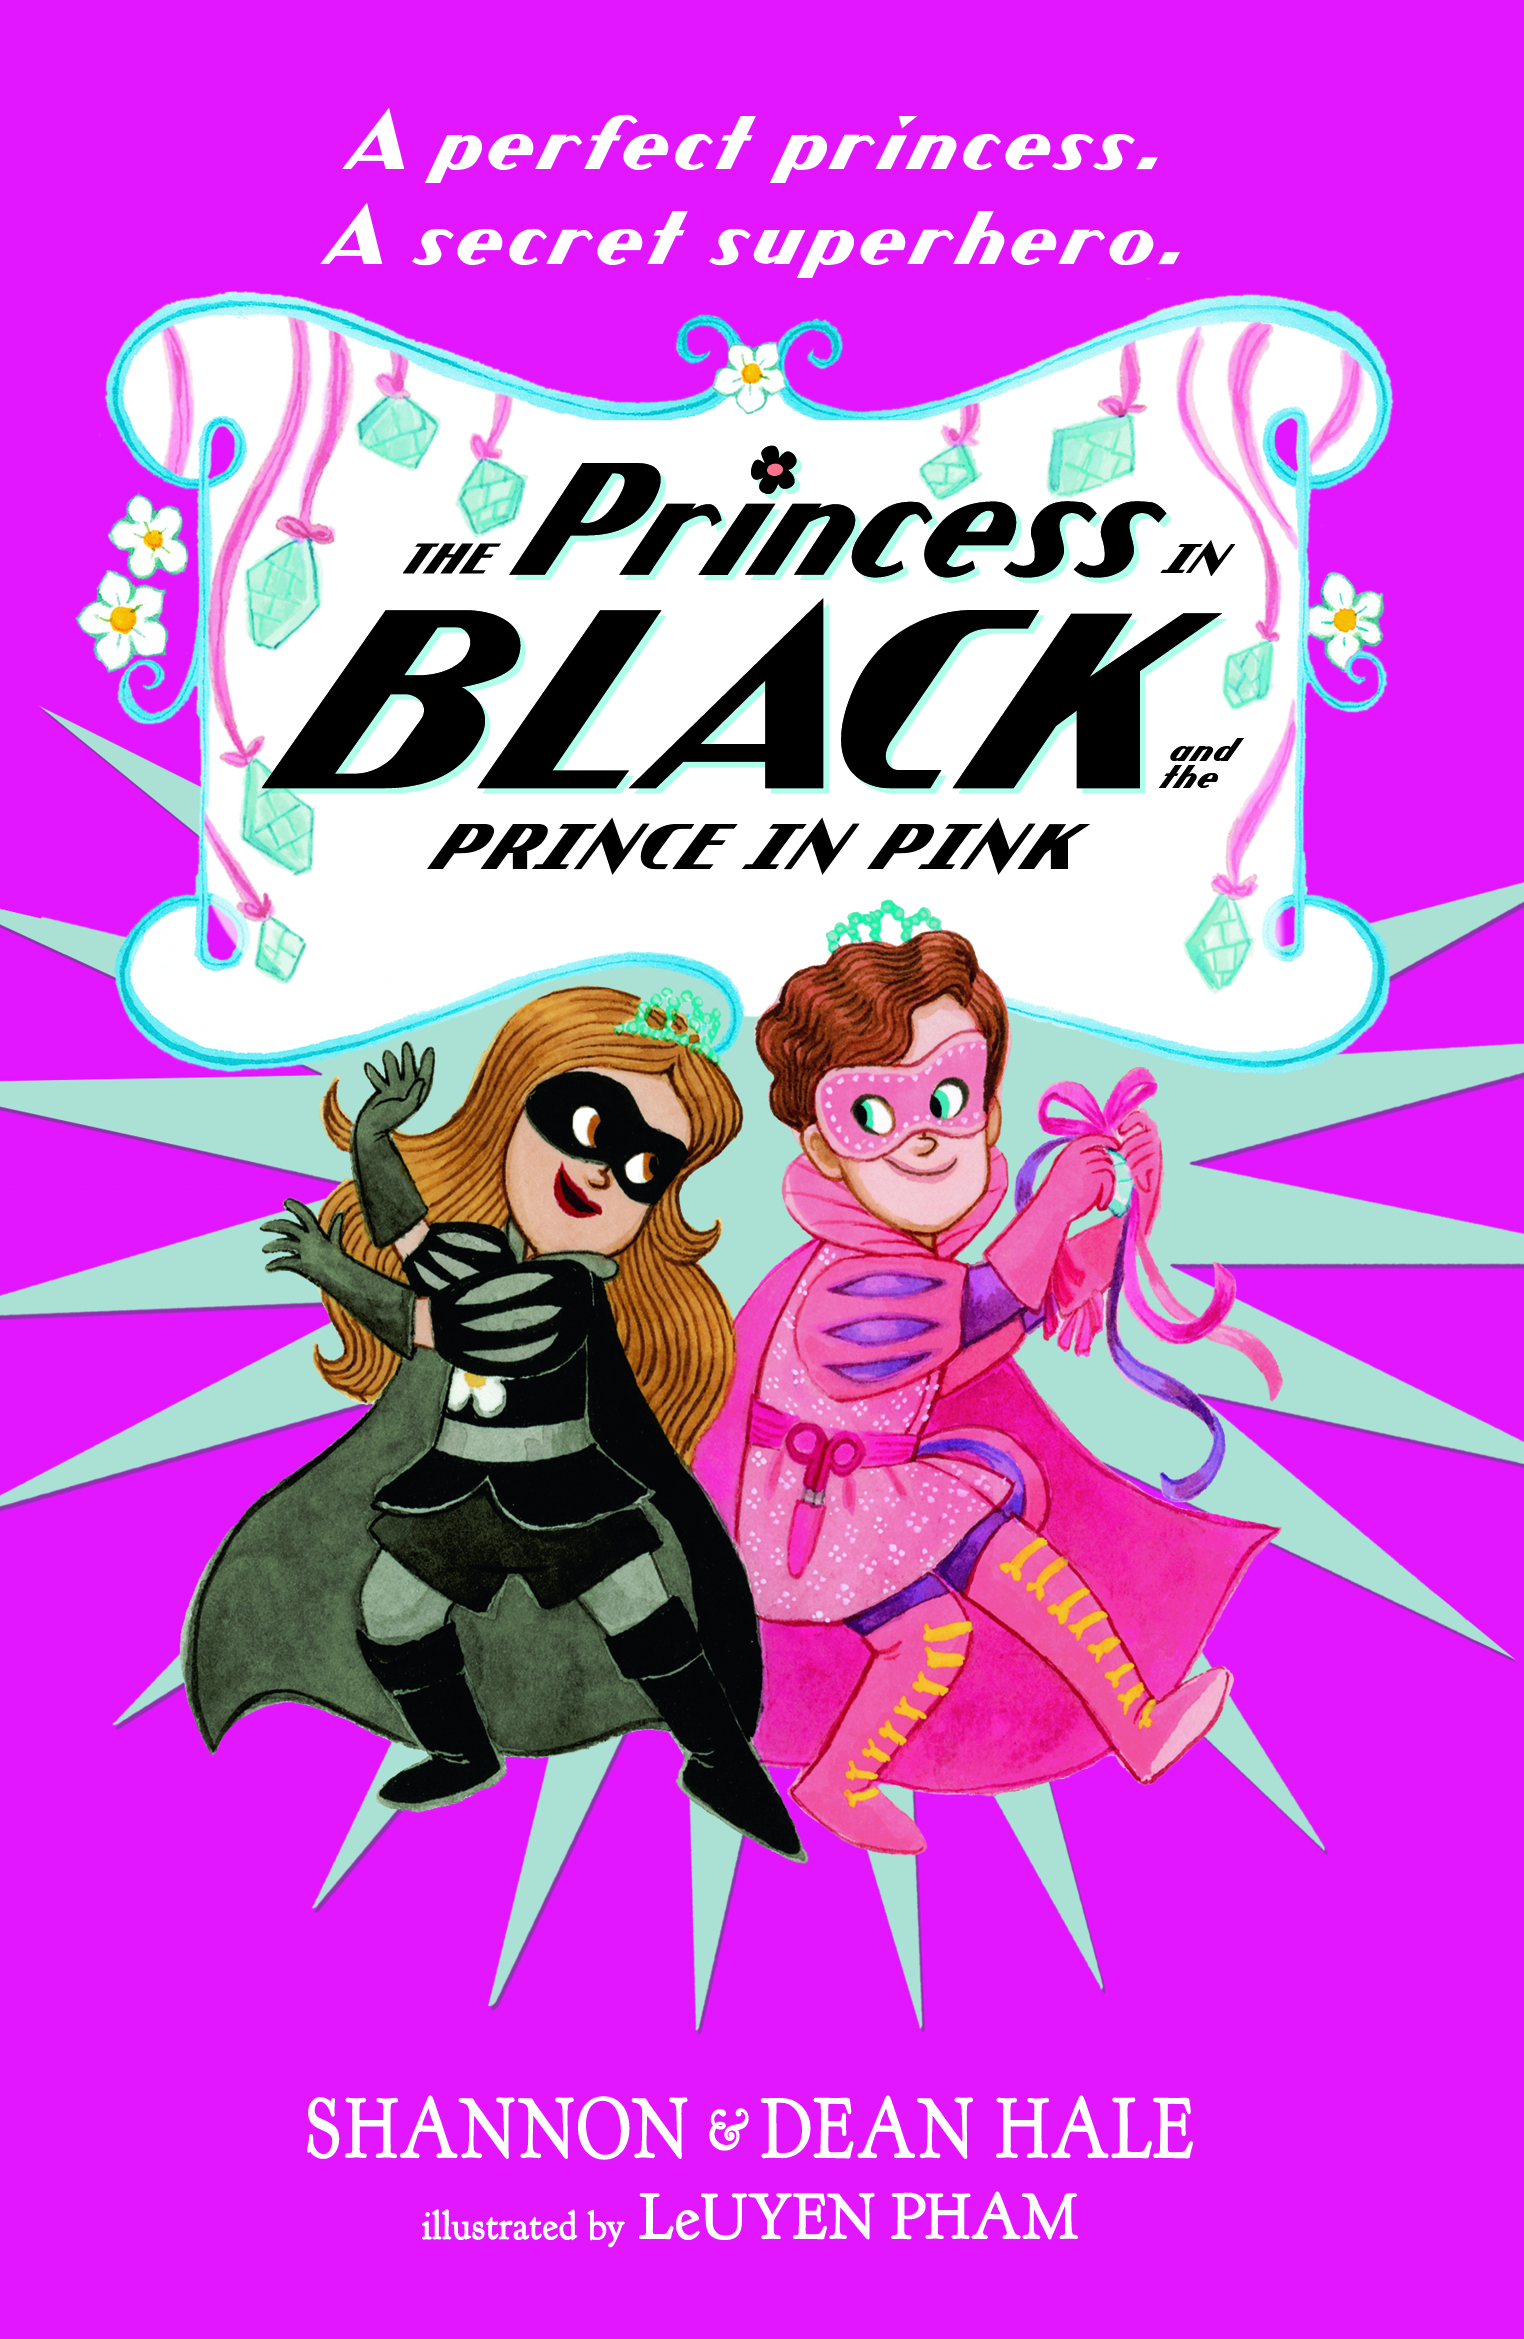 The-Princess-in-Black-and-the-Prince-in-Pink